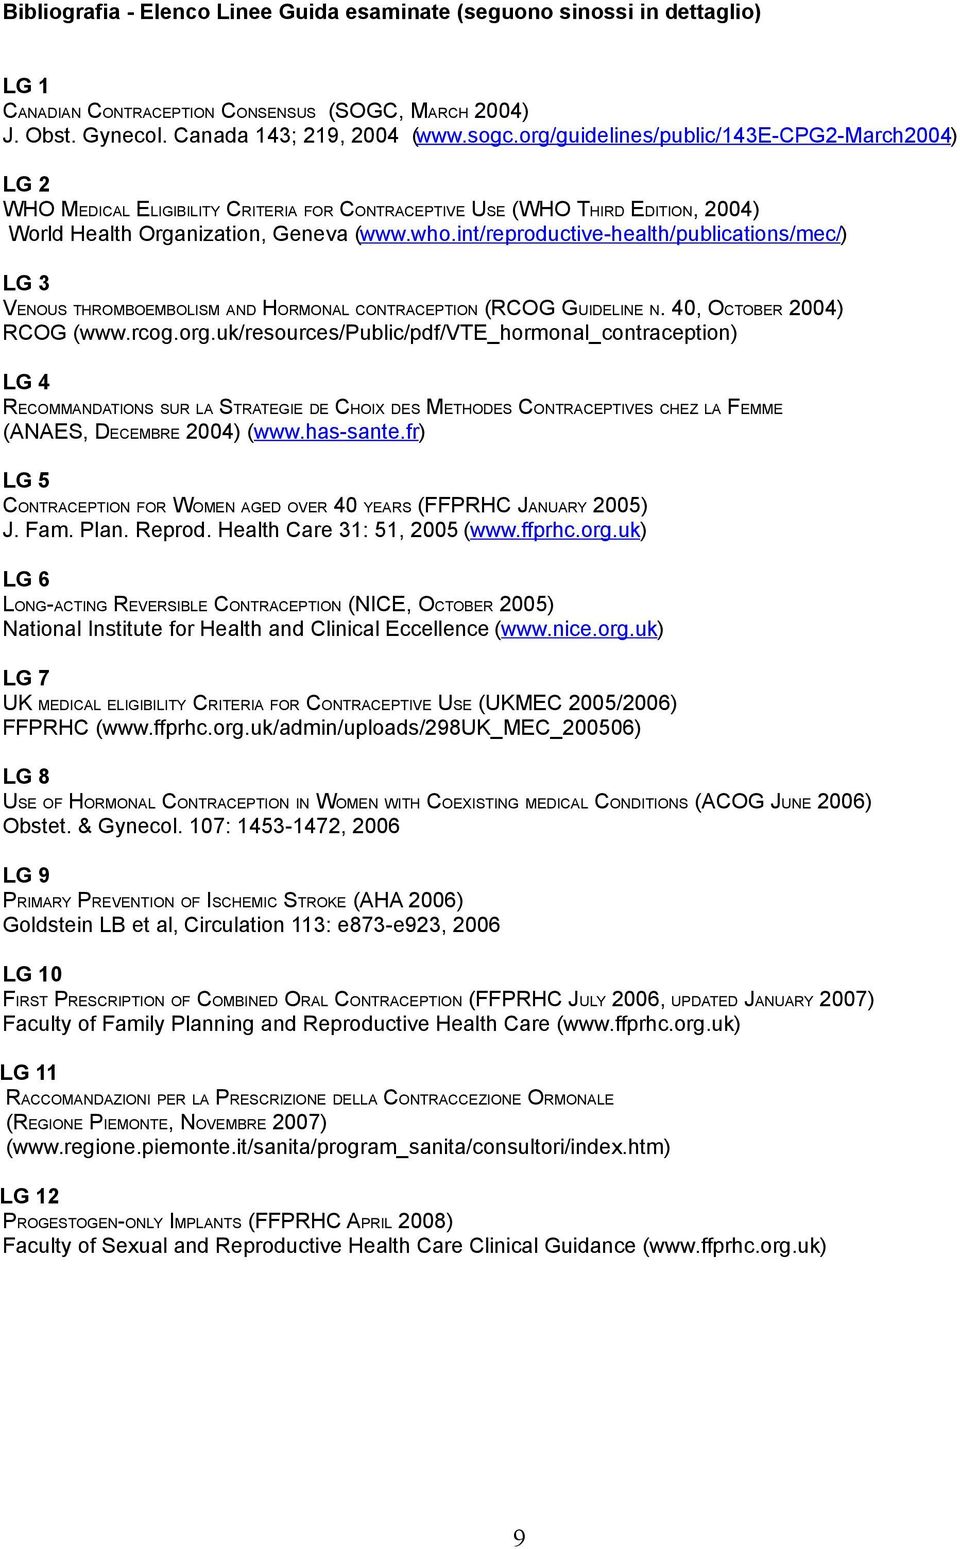 int/reproductive-health/publications/mec/) LG 3 VENOUS THROMBOEMBOLISM AND HORMONAL CONTRACEPTION (RCOG GUIDELINE N. 40, OCTOBER 2004) RCOG (www.rcog.org.